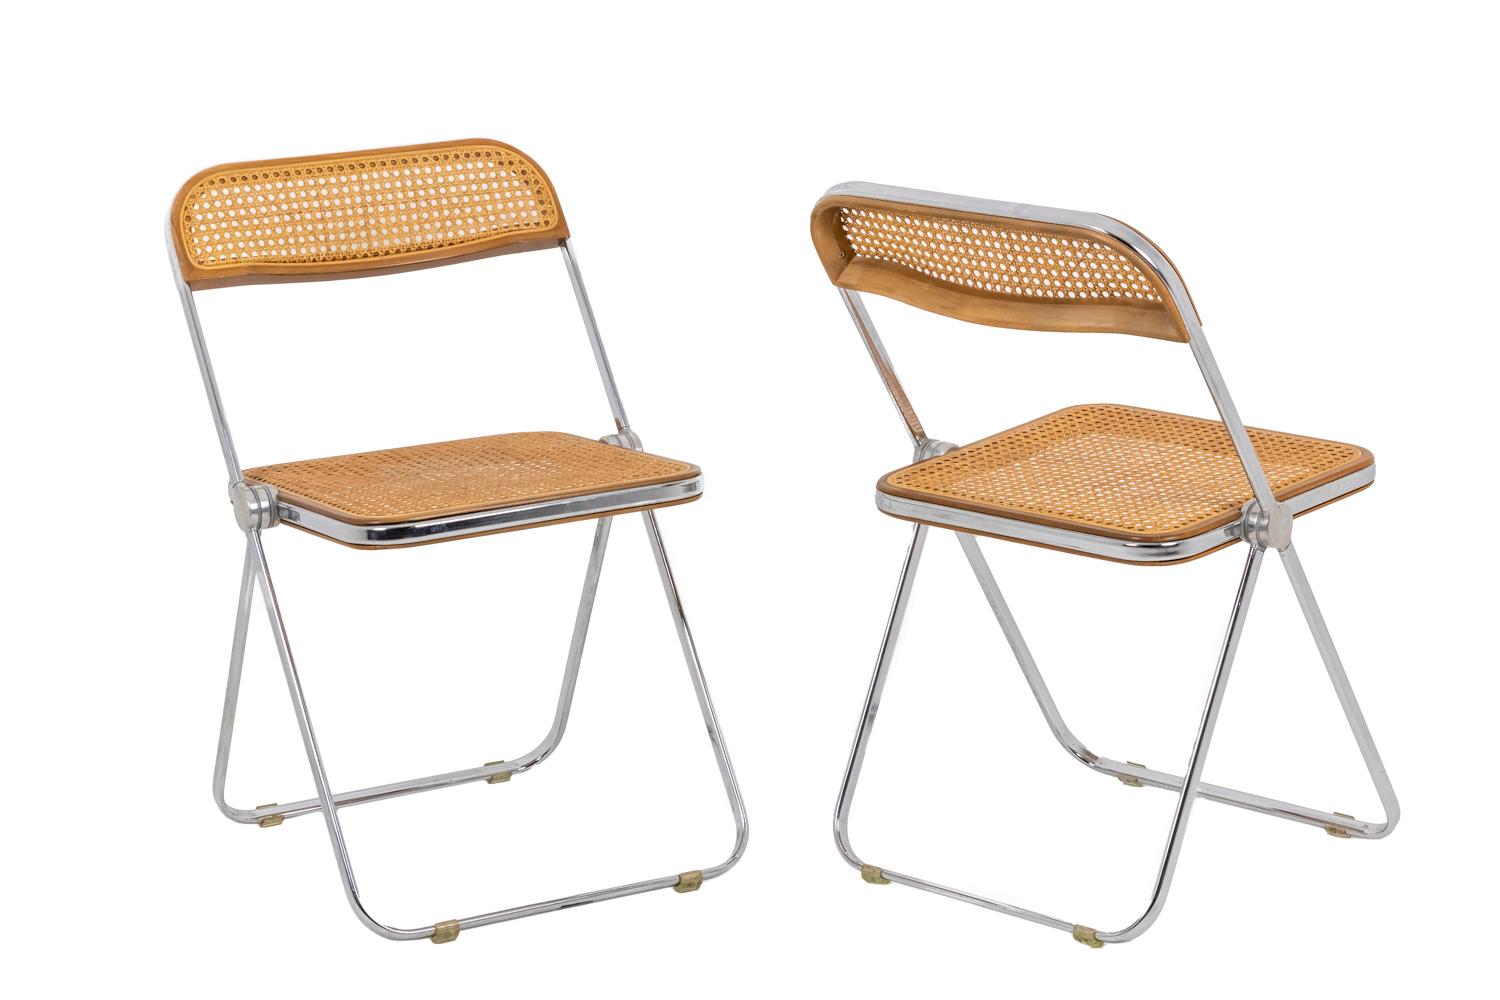 Series of five caned chairs in varnished blond beech. Folding structure in chromed metal. 

Plia model.

Italian work realized in the 1970s.

Giancarlo Piretti (1940-) is an Italian designer who marked the history of design by his innovative